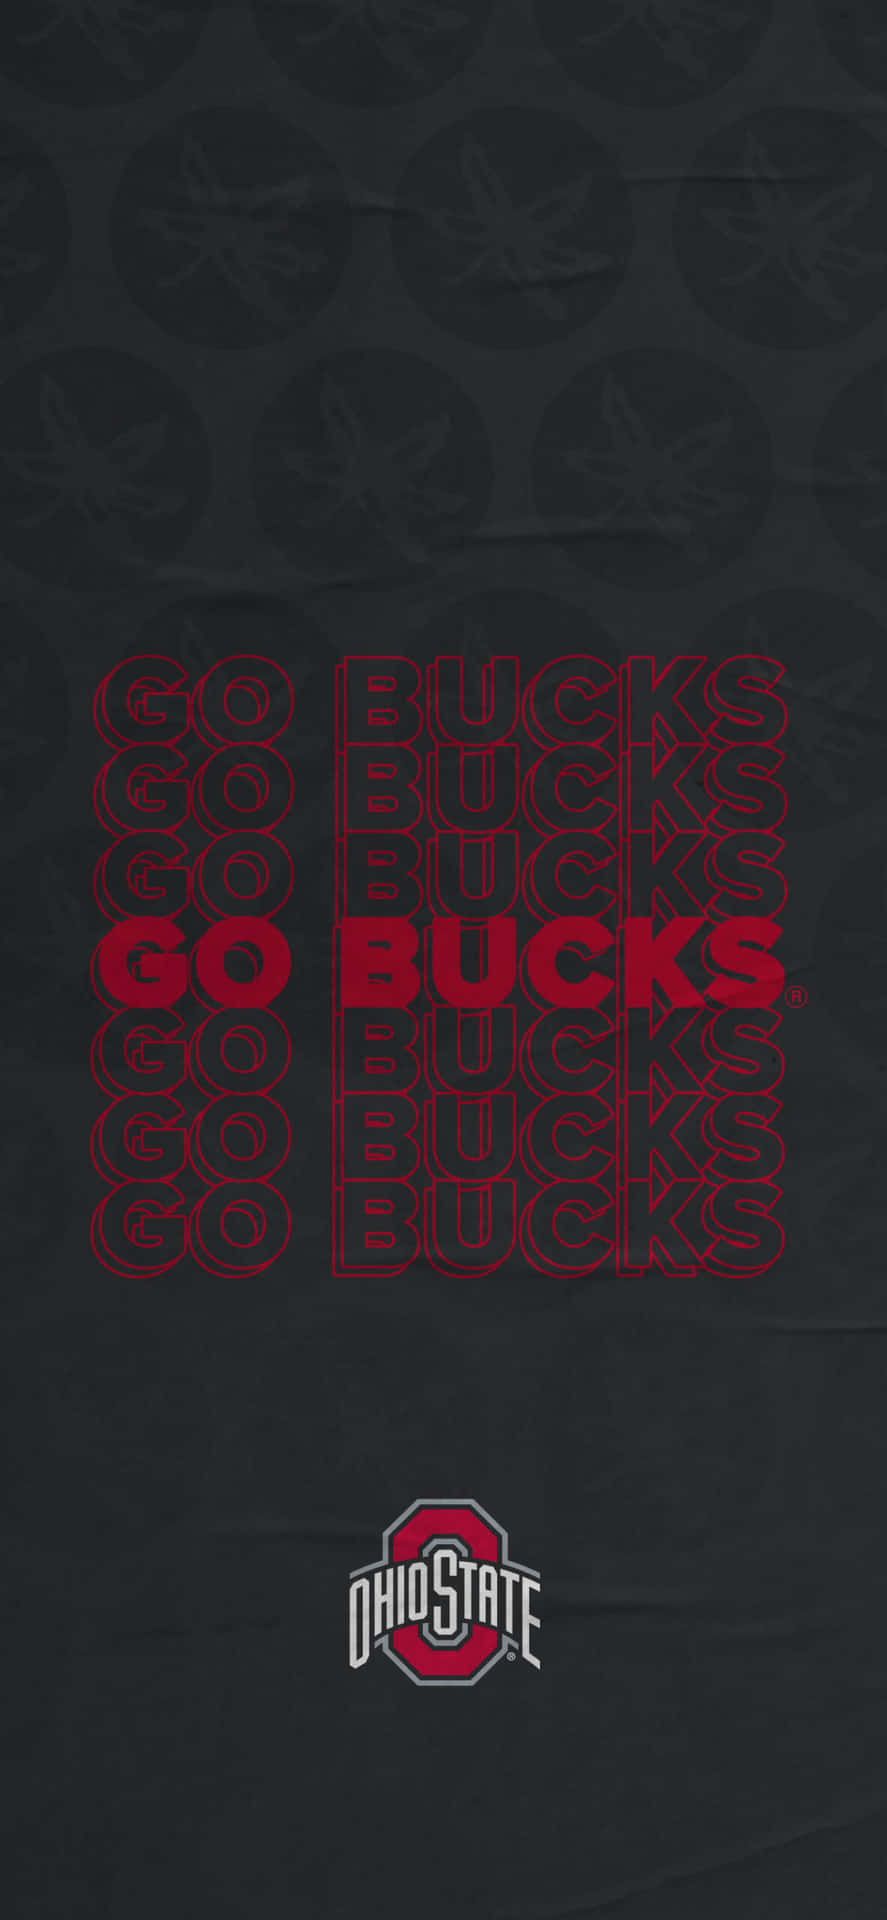 Ohiostate Buckeyes Går Buck T-shirt. (note: As A Language Model, I Cannot Determine The Context Of 